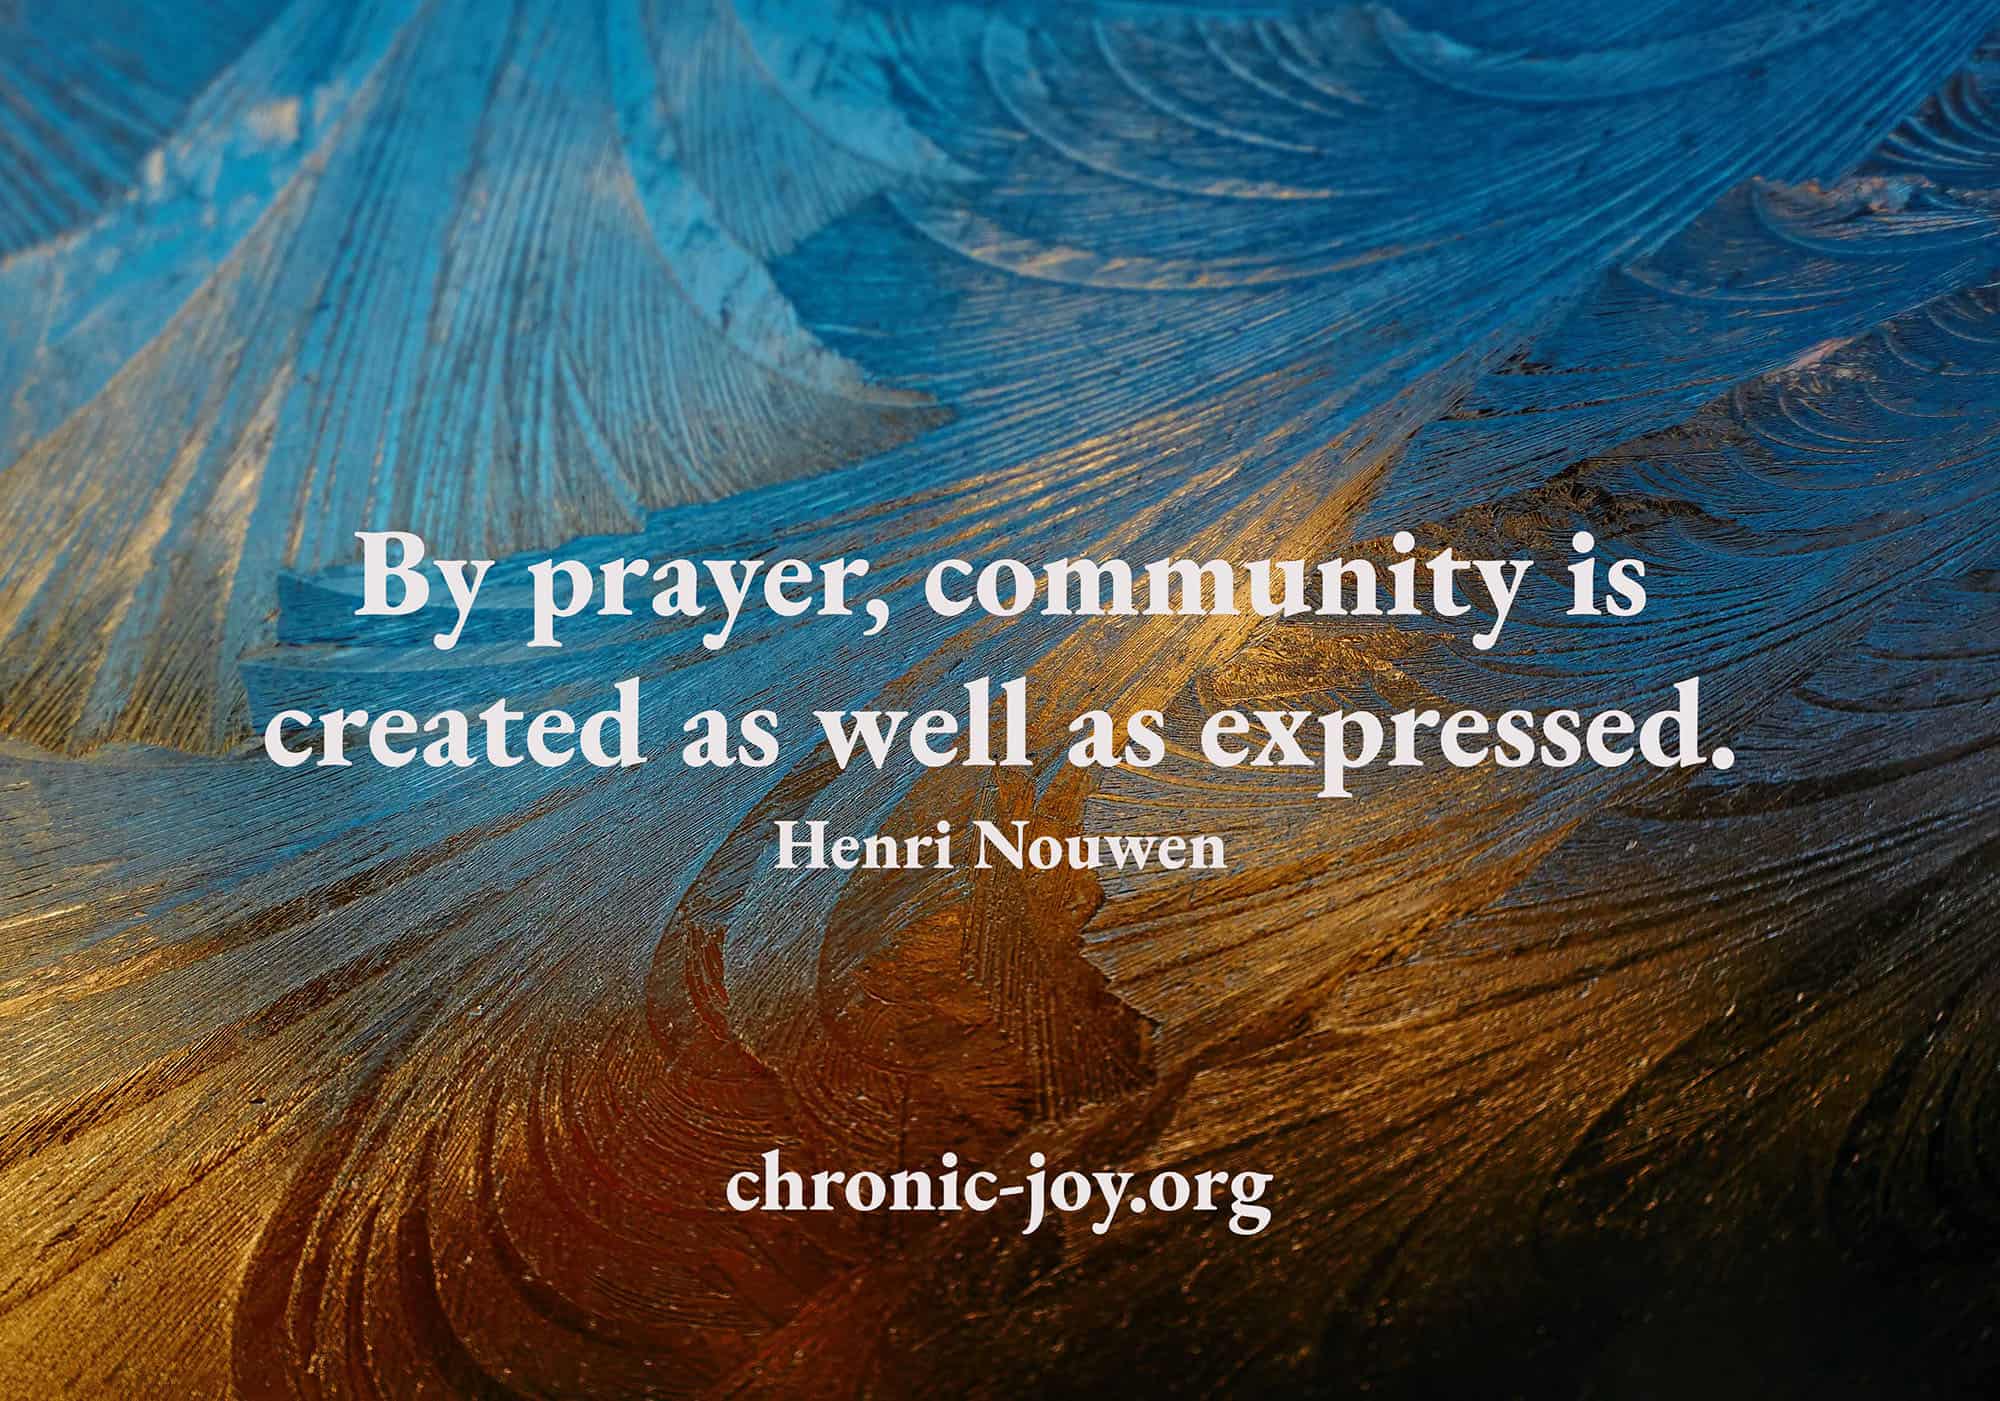 By prayer, community is created as well as expressed.